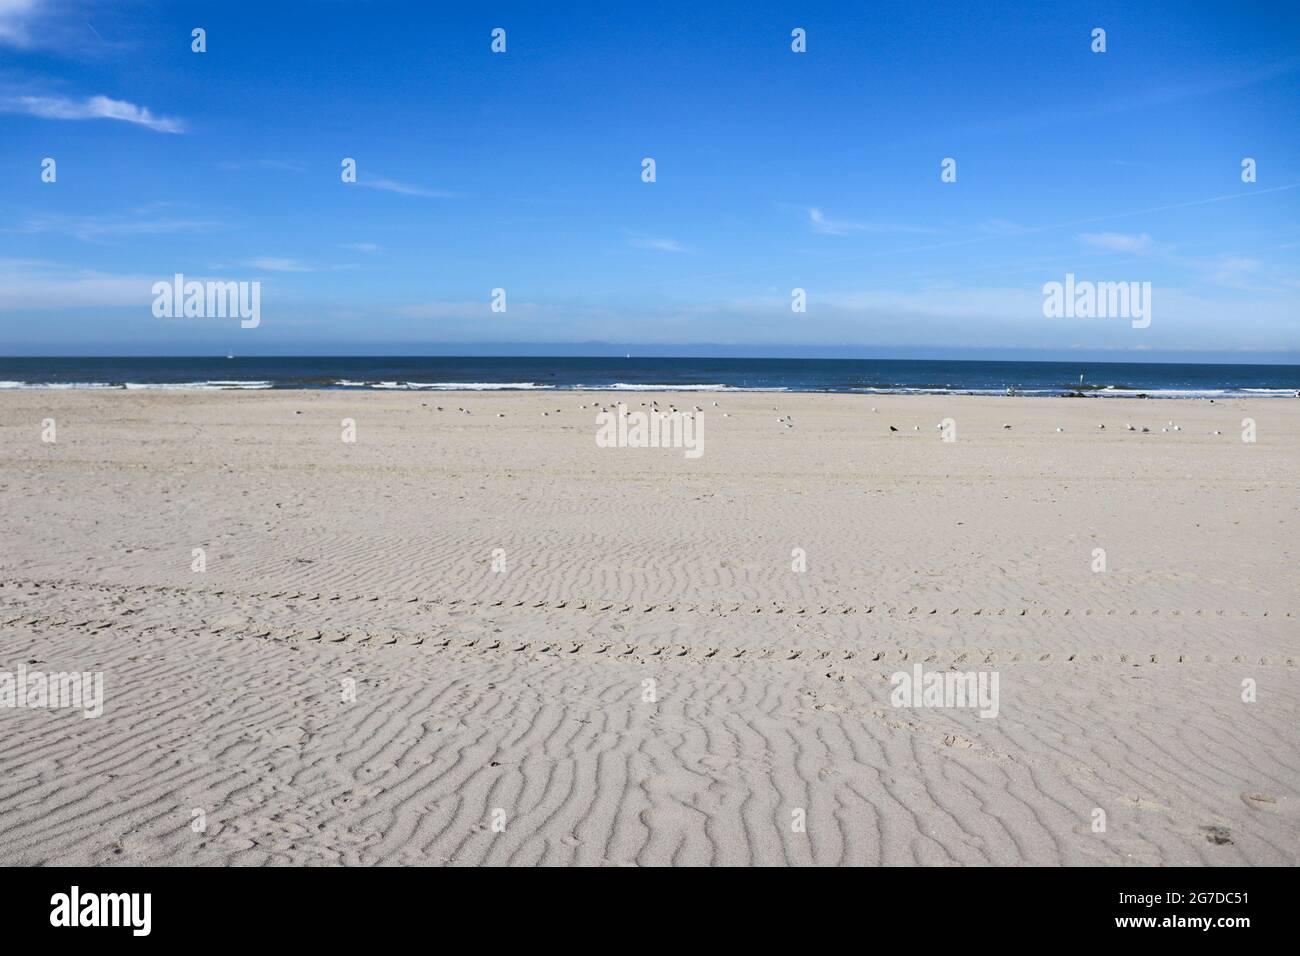 Empty beach. Sand beach without people. Seascape. Stock Photo